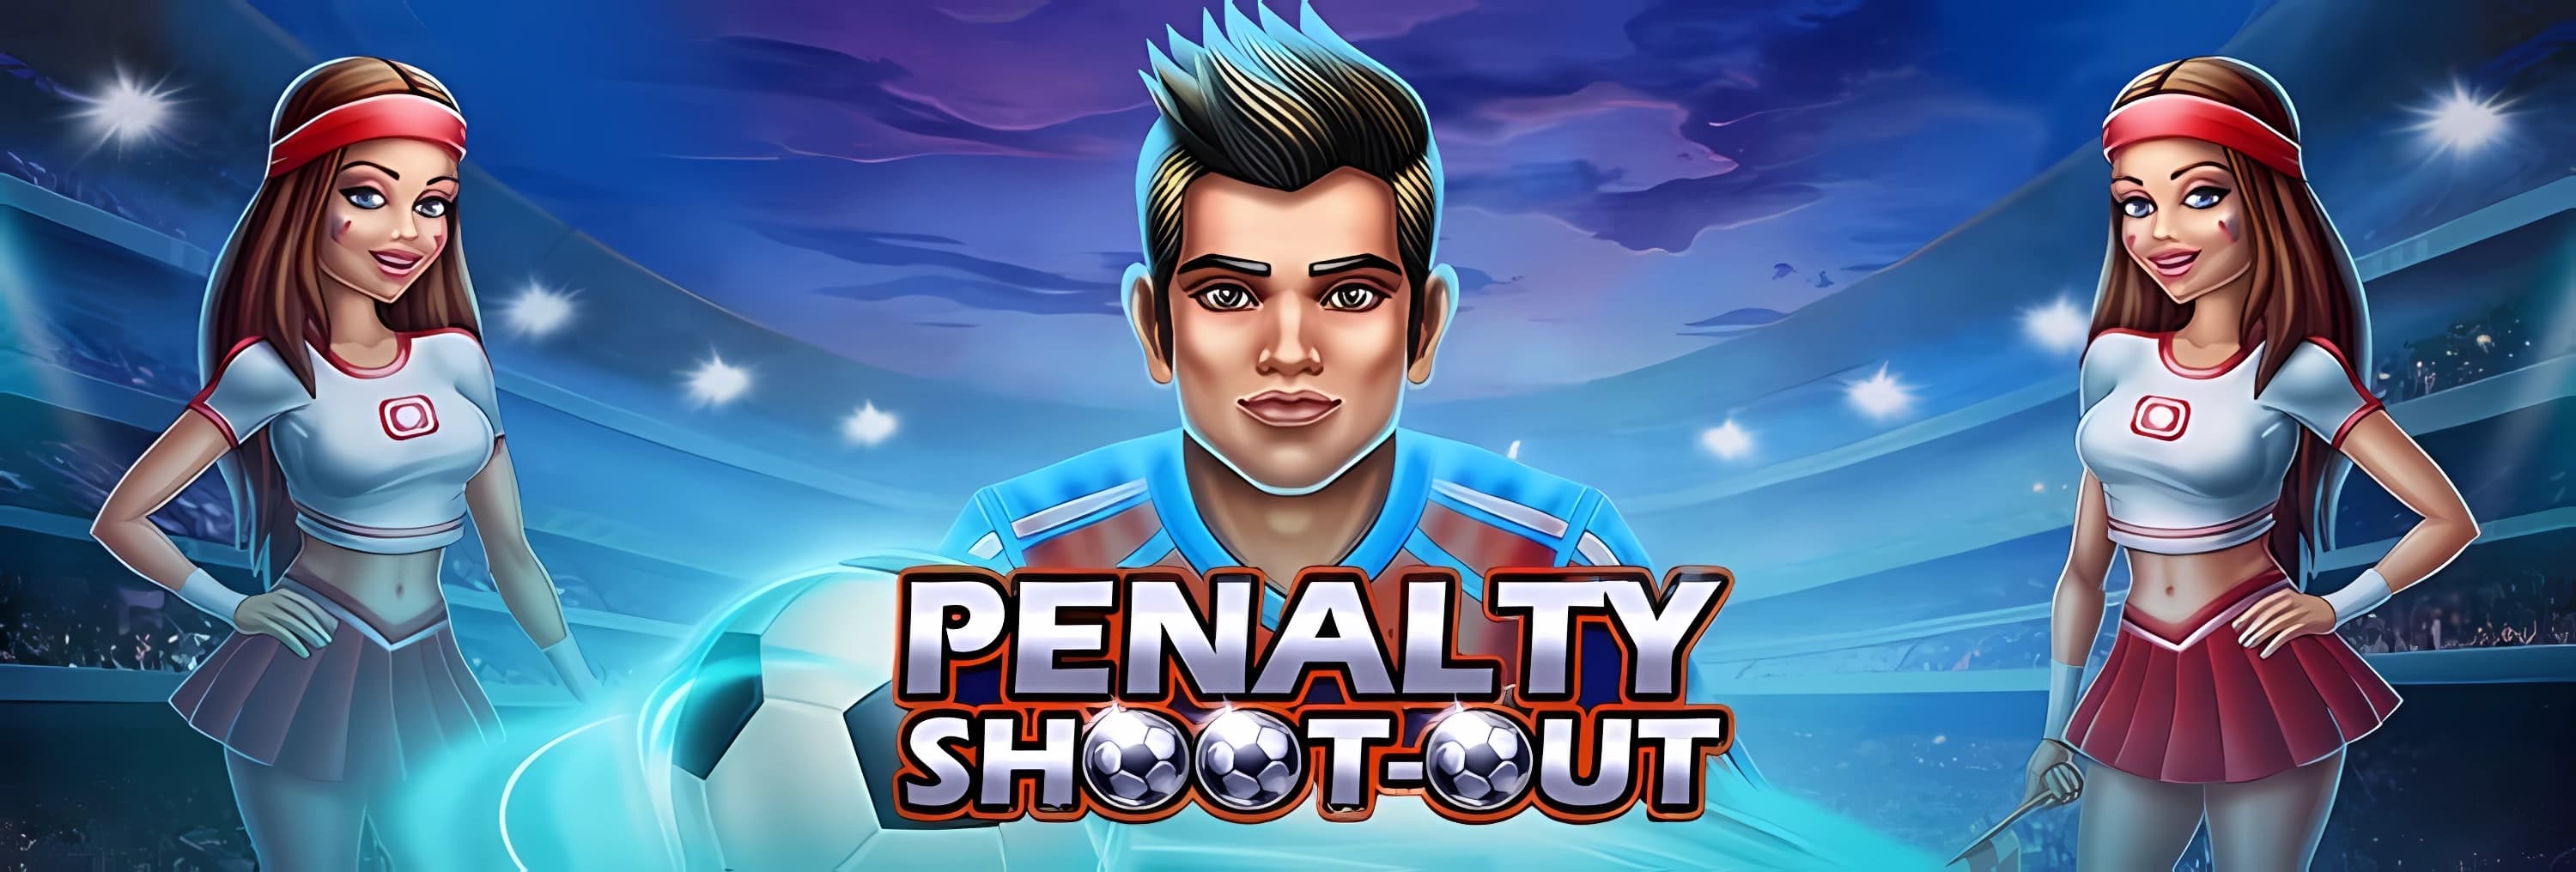 Penalty Shoot Out cover